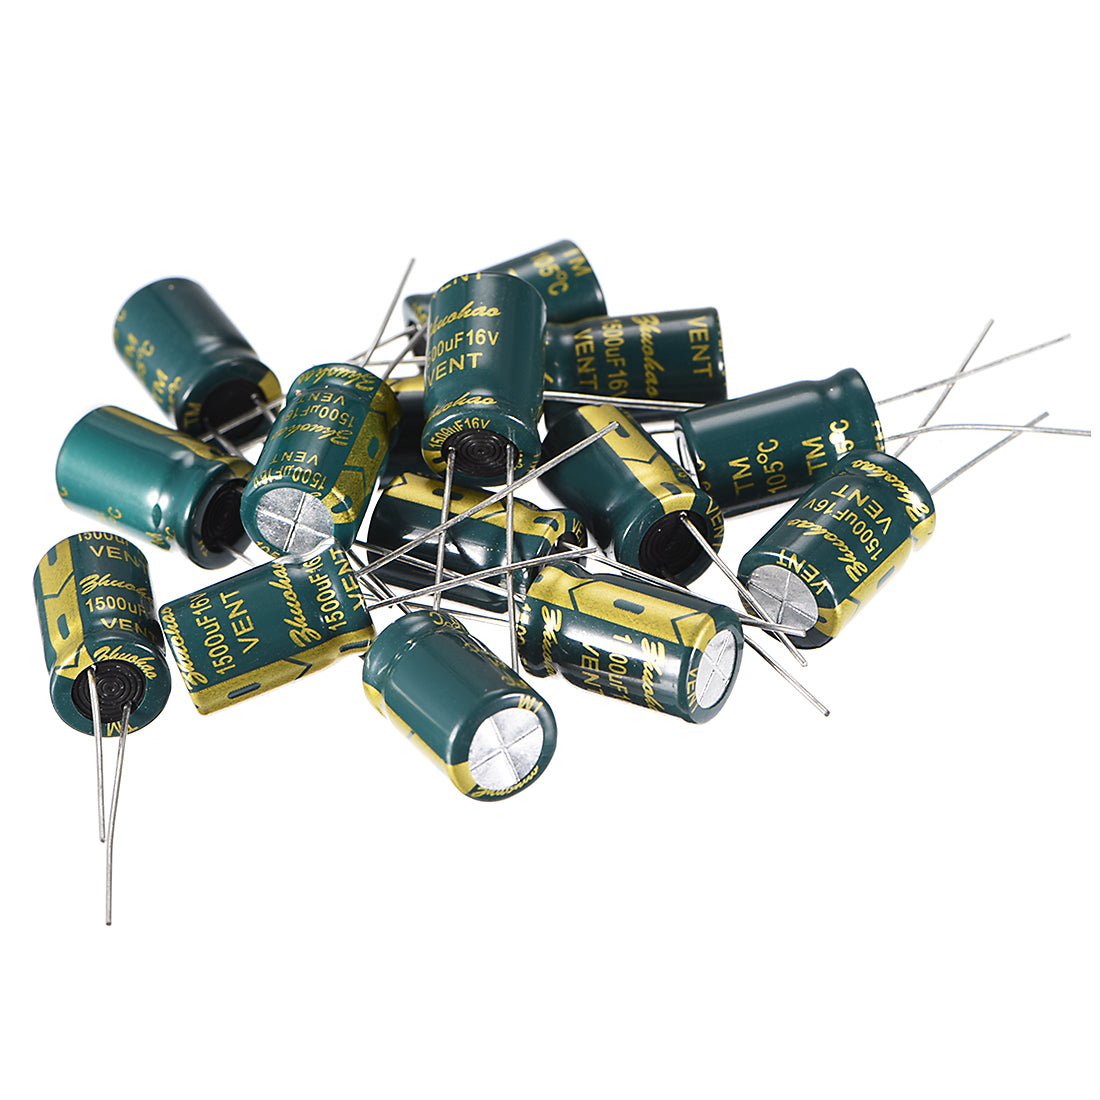 uxcell Uxcell Aluminum Radial Electrolytic Capacitor Low ESR Green with 1500UF 16V 105 Celsius Life 3000H 10 x 17 mm High Ripple Current,Low Impedance 15pcs